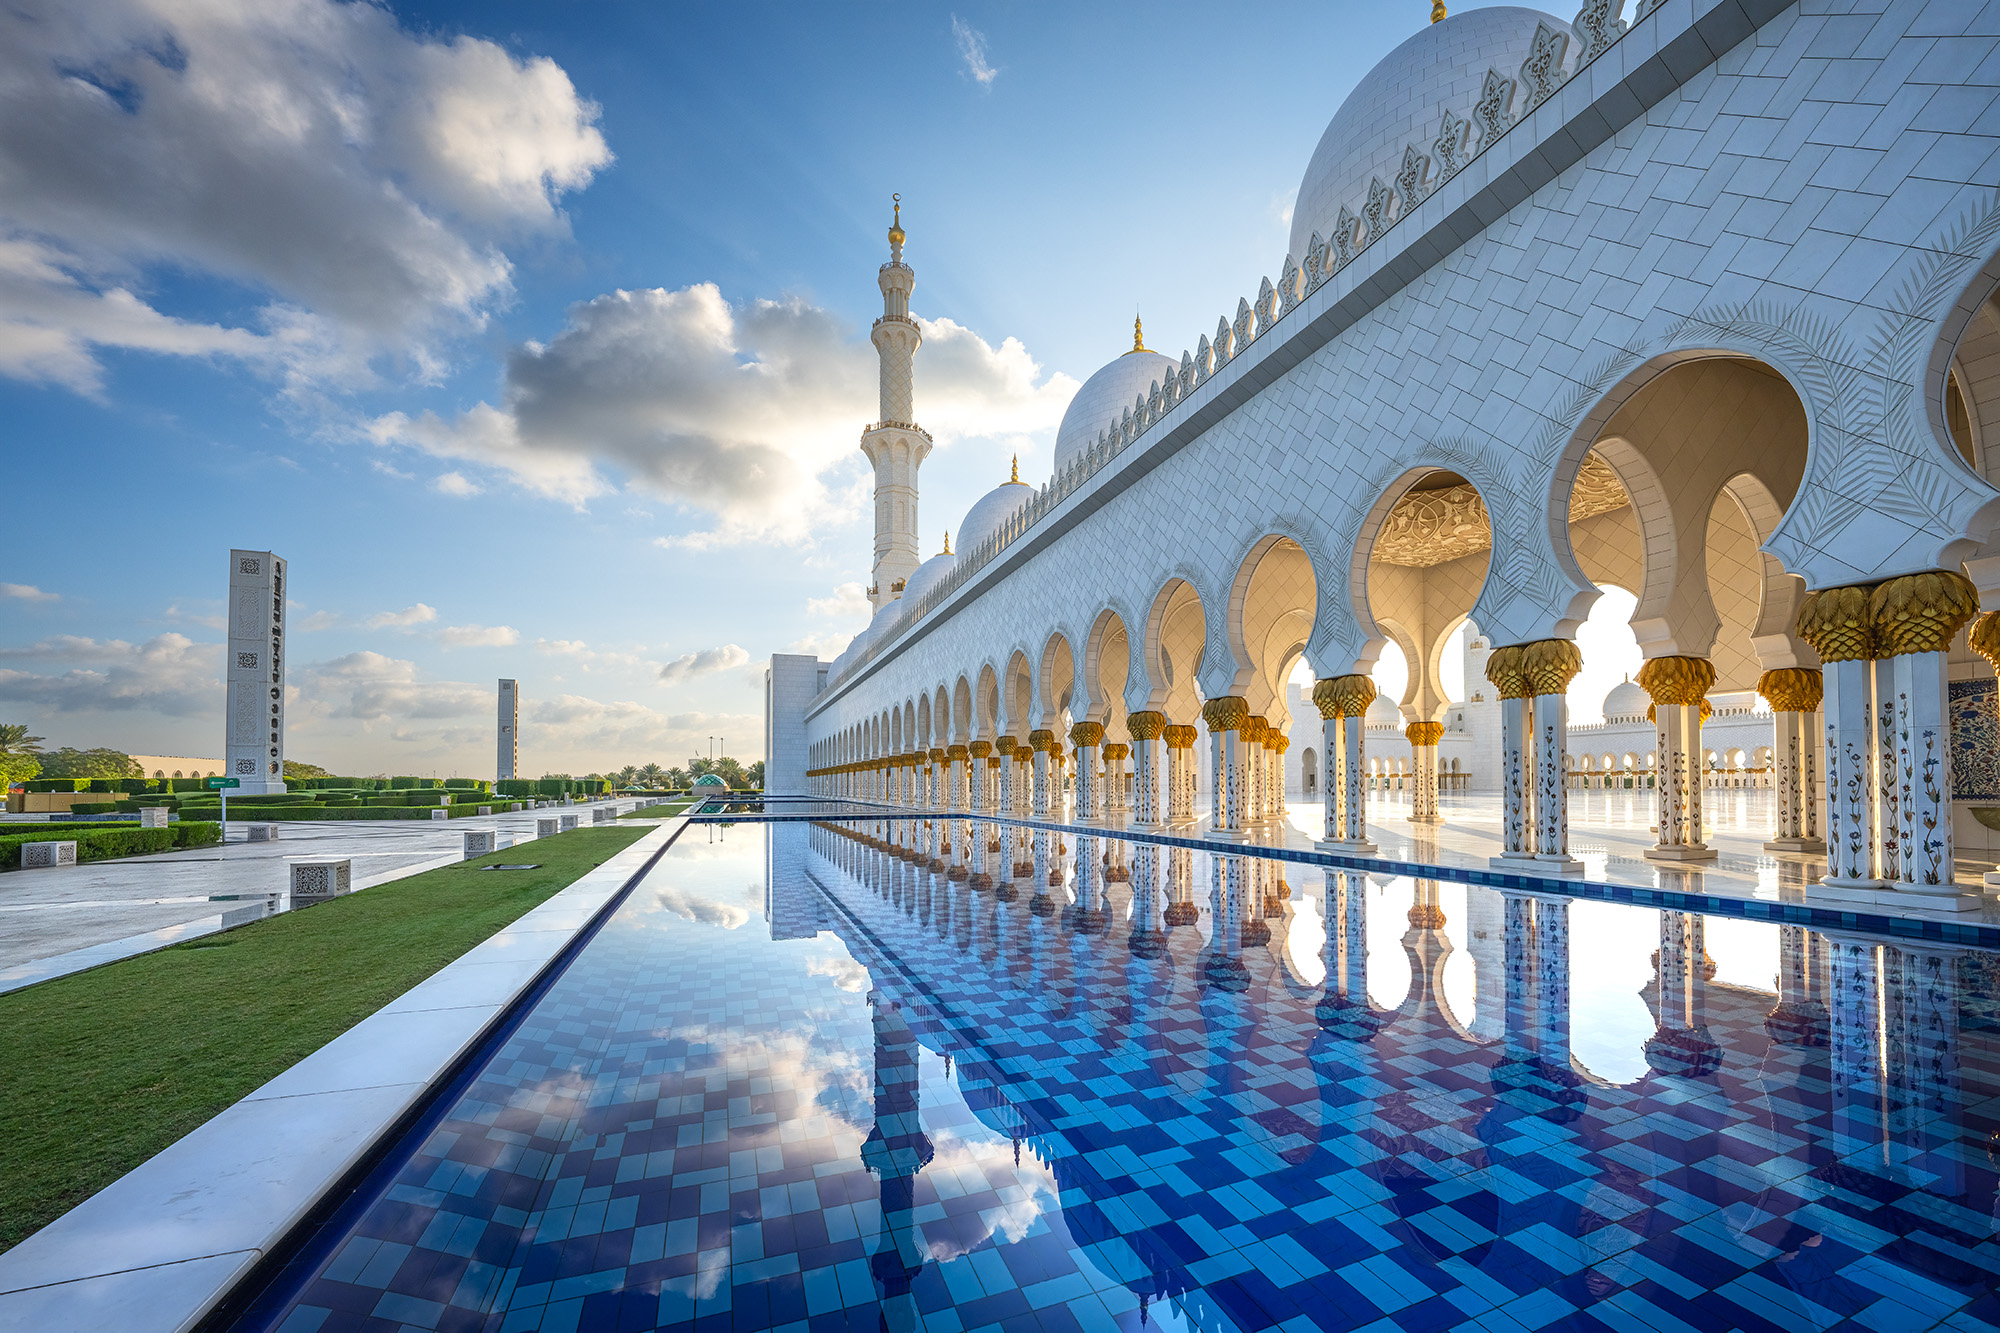 On the side of the majestic Sheikh Zayed Grand Mosque in Abu Dhabi, I framed a unique perspective. In the reflection's depths...